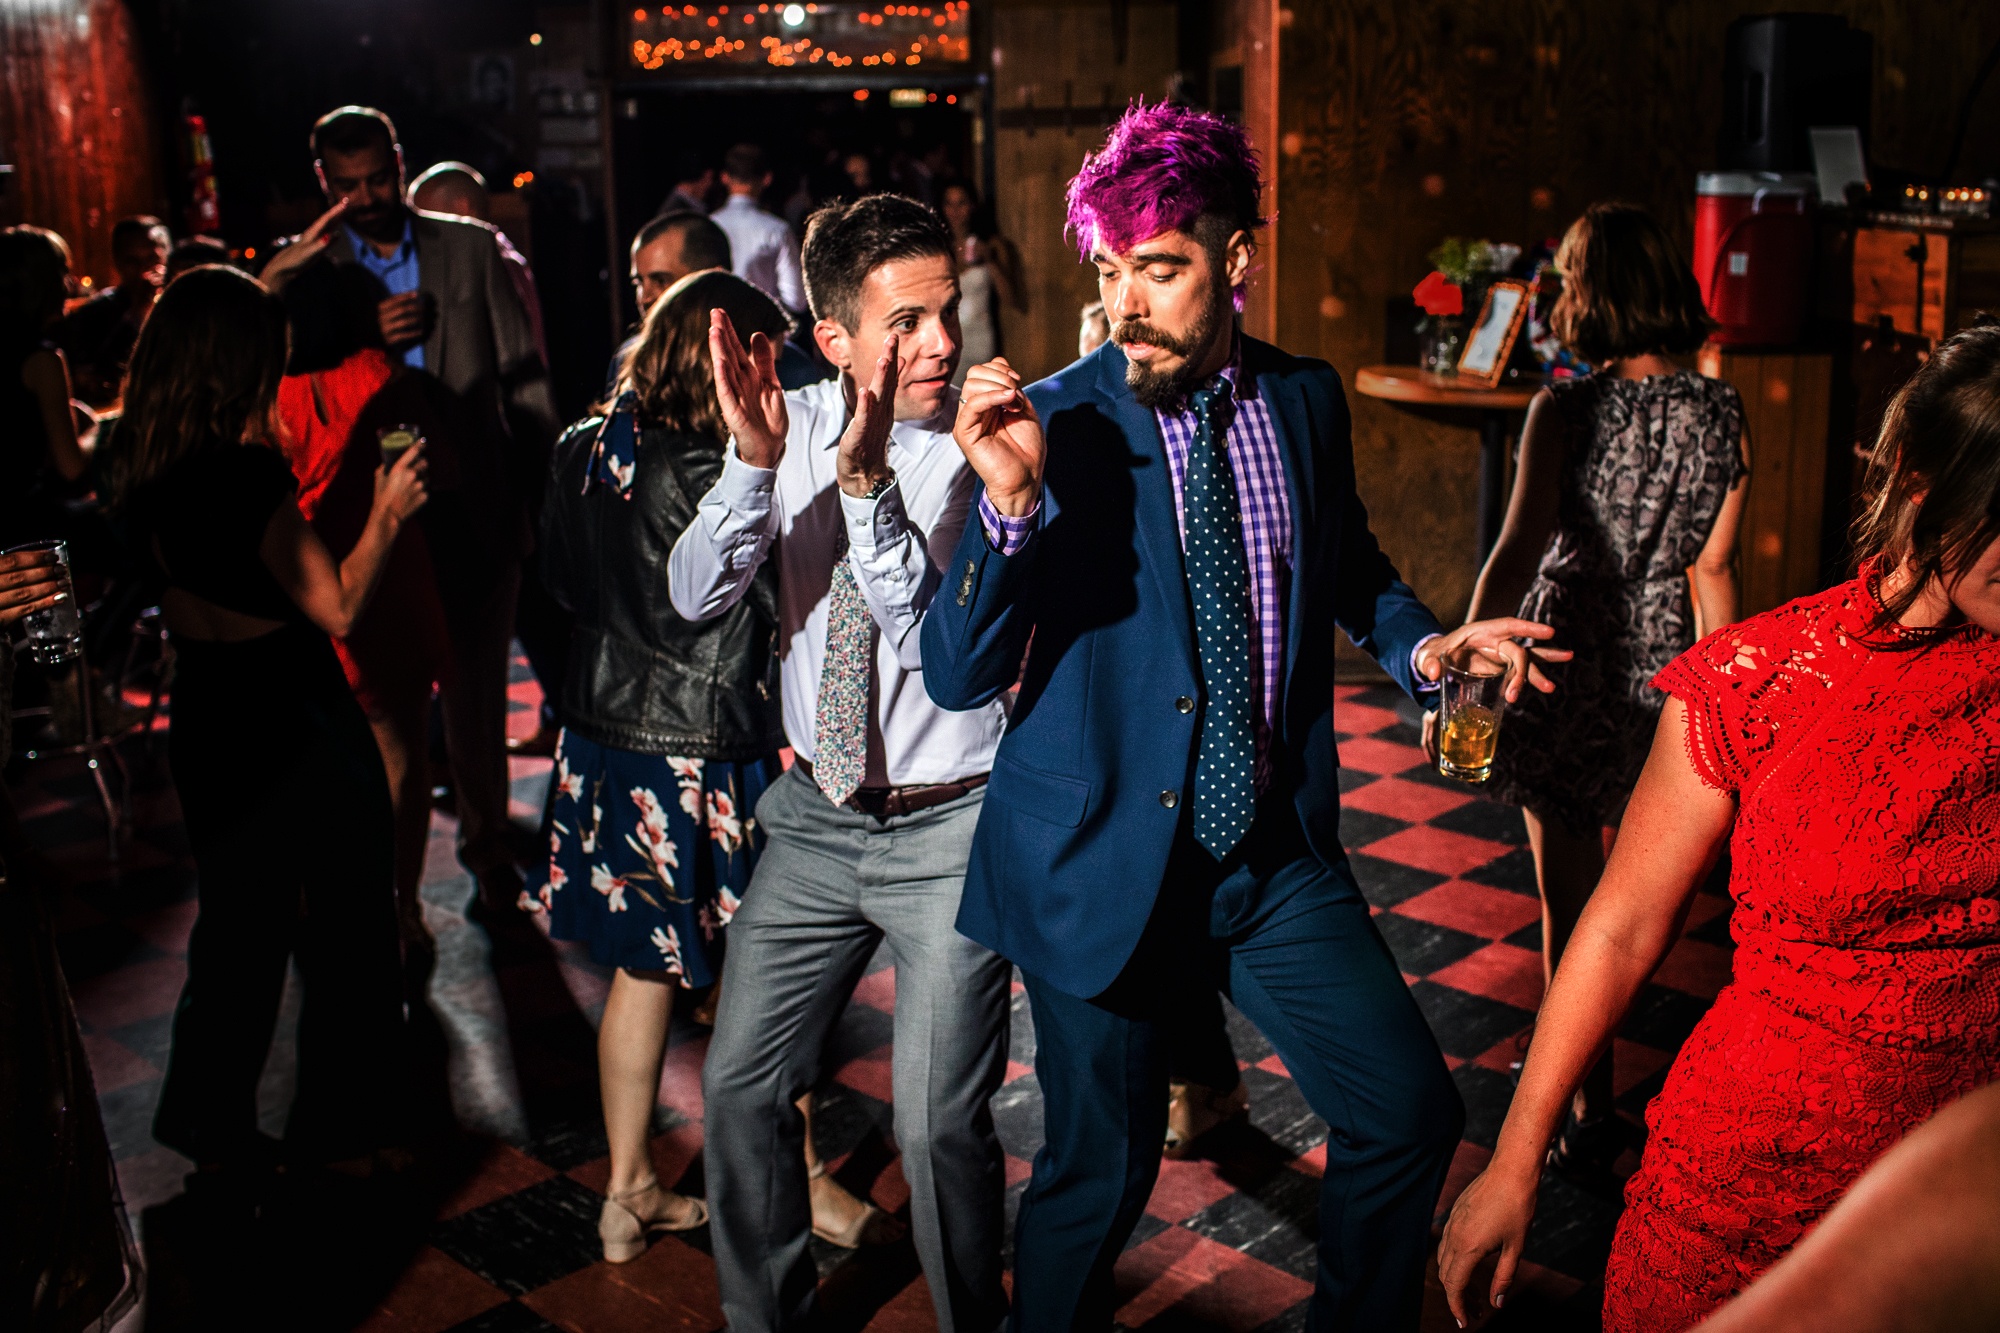 Guests dance together during a Hideout Chicago wedding reception